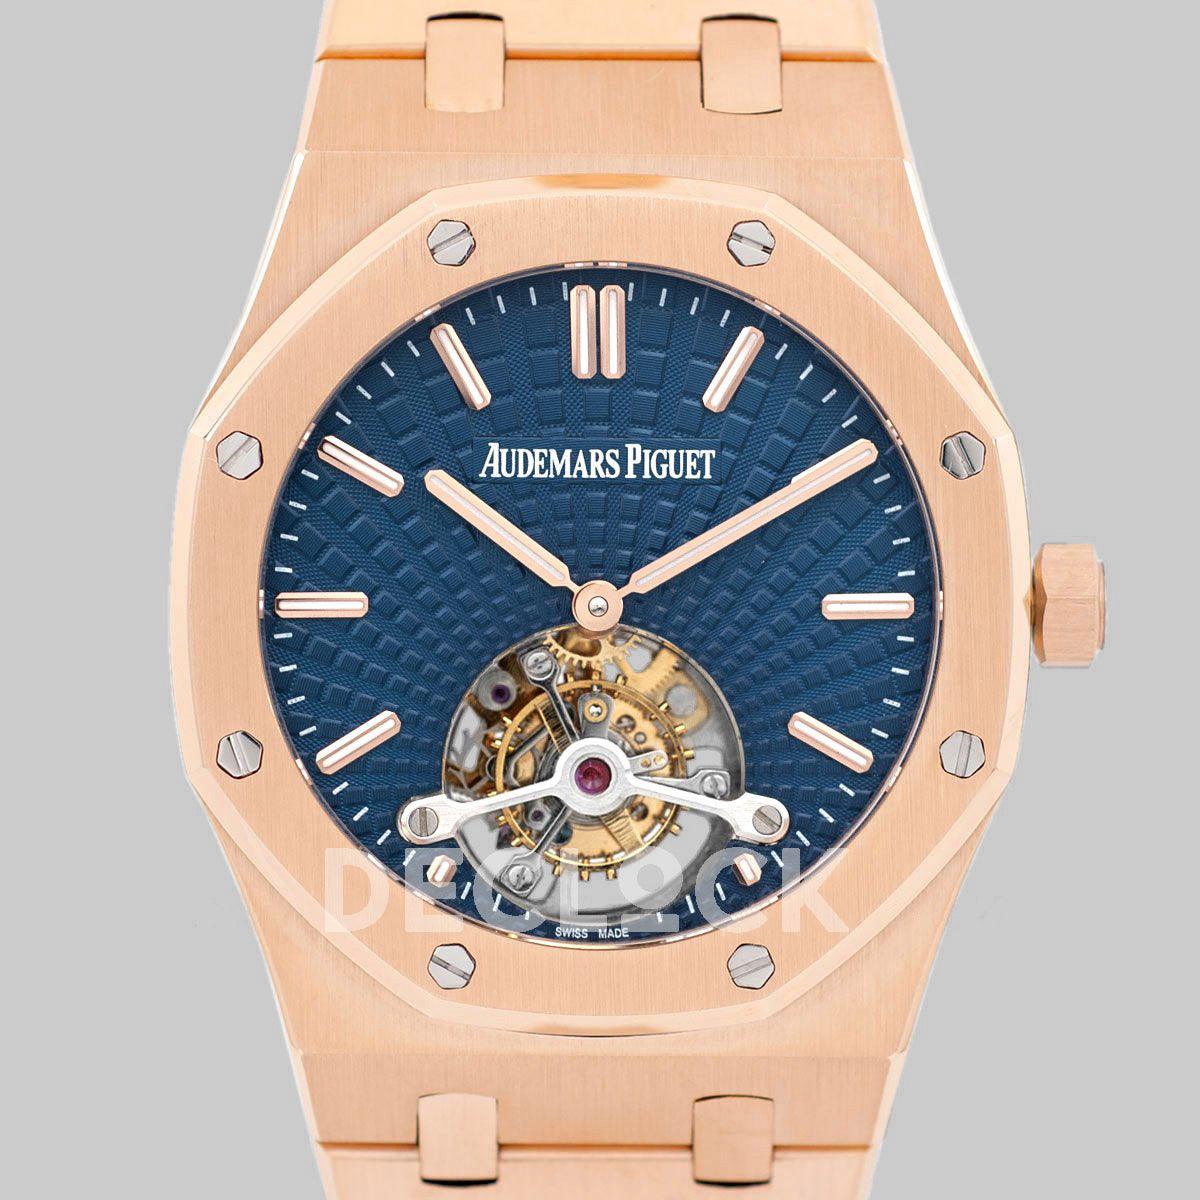 Replica Audemars Pigeut Royal Oak Tourbillon Extra-Thin Blue Dial in Rose Gold 2018 SIHH Ref. 26522OR - Replica Watches